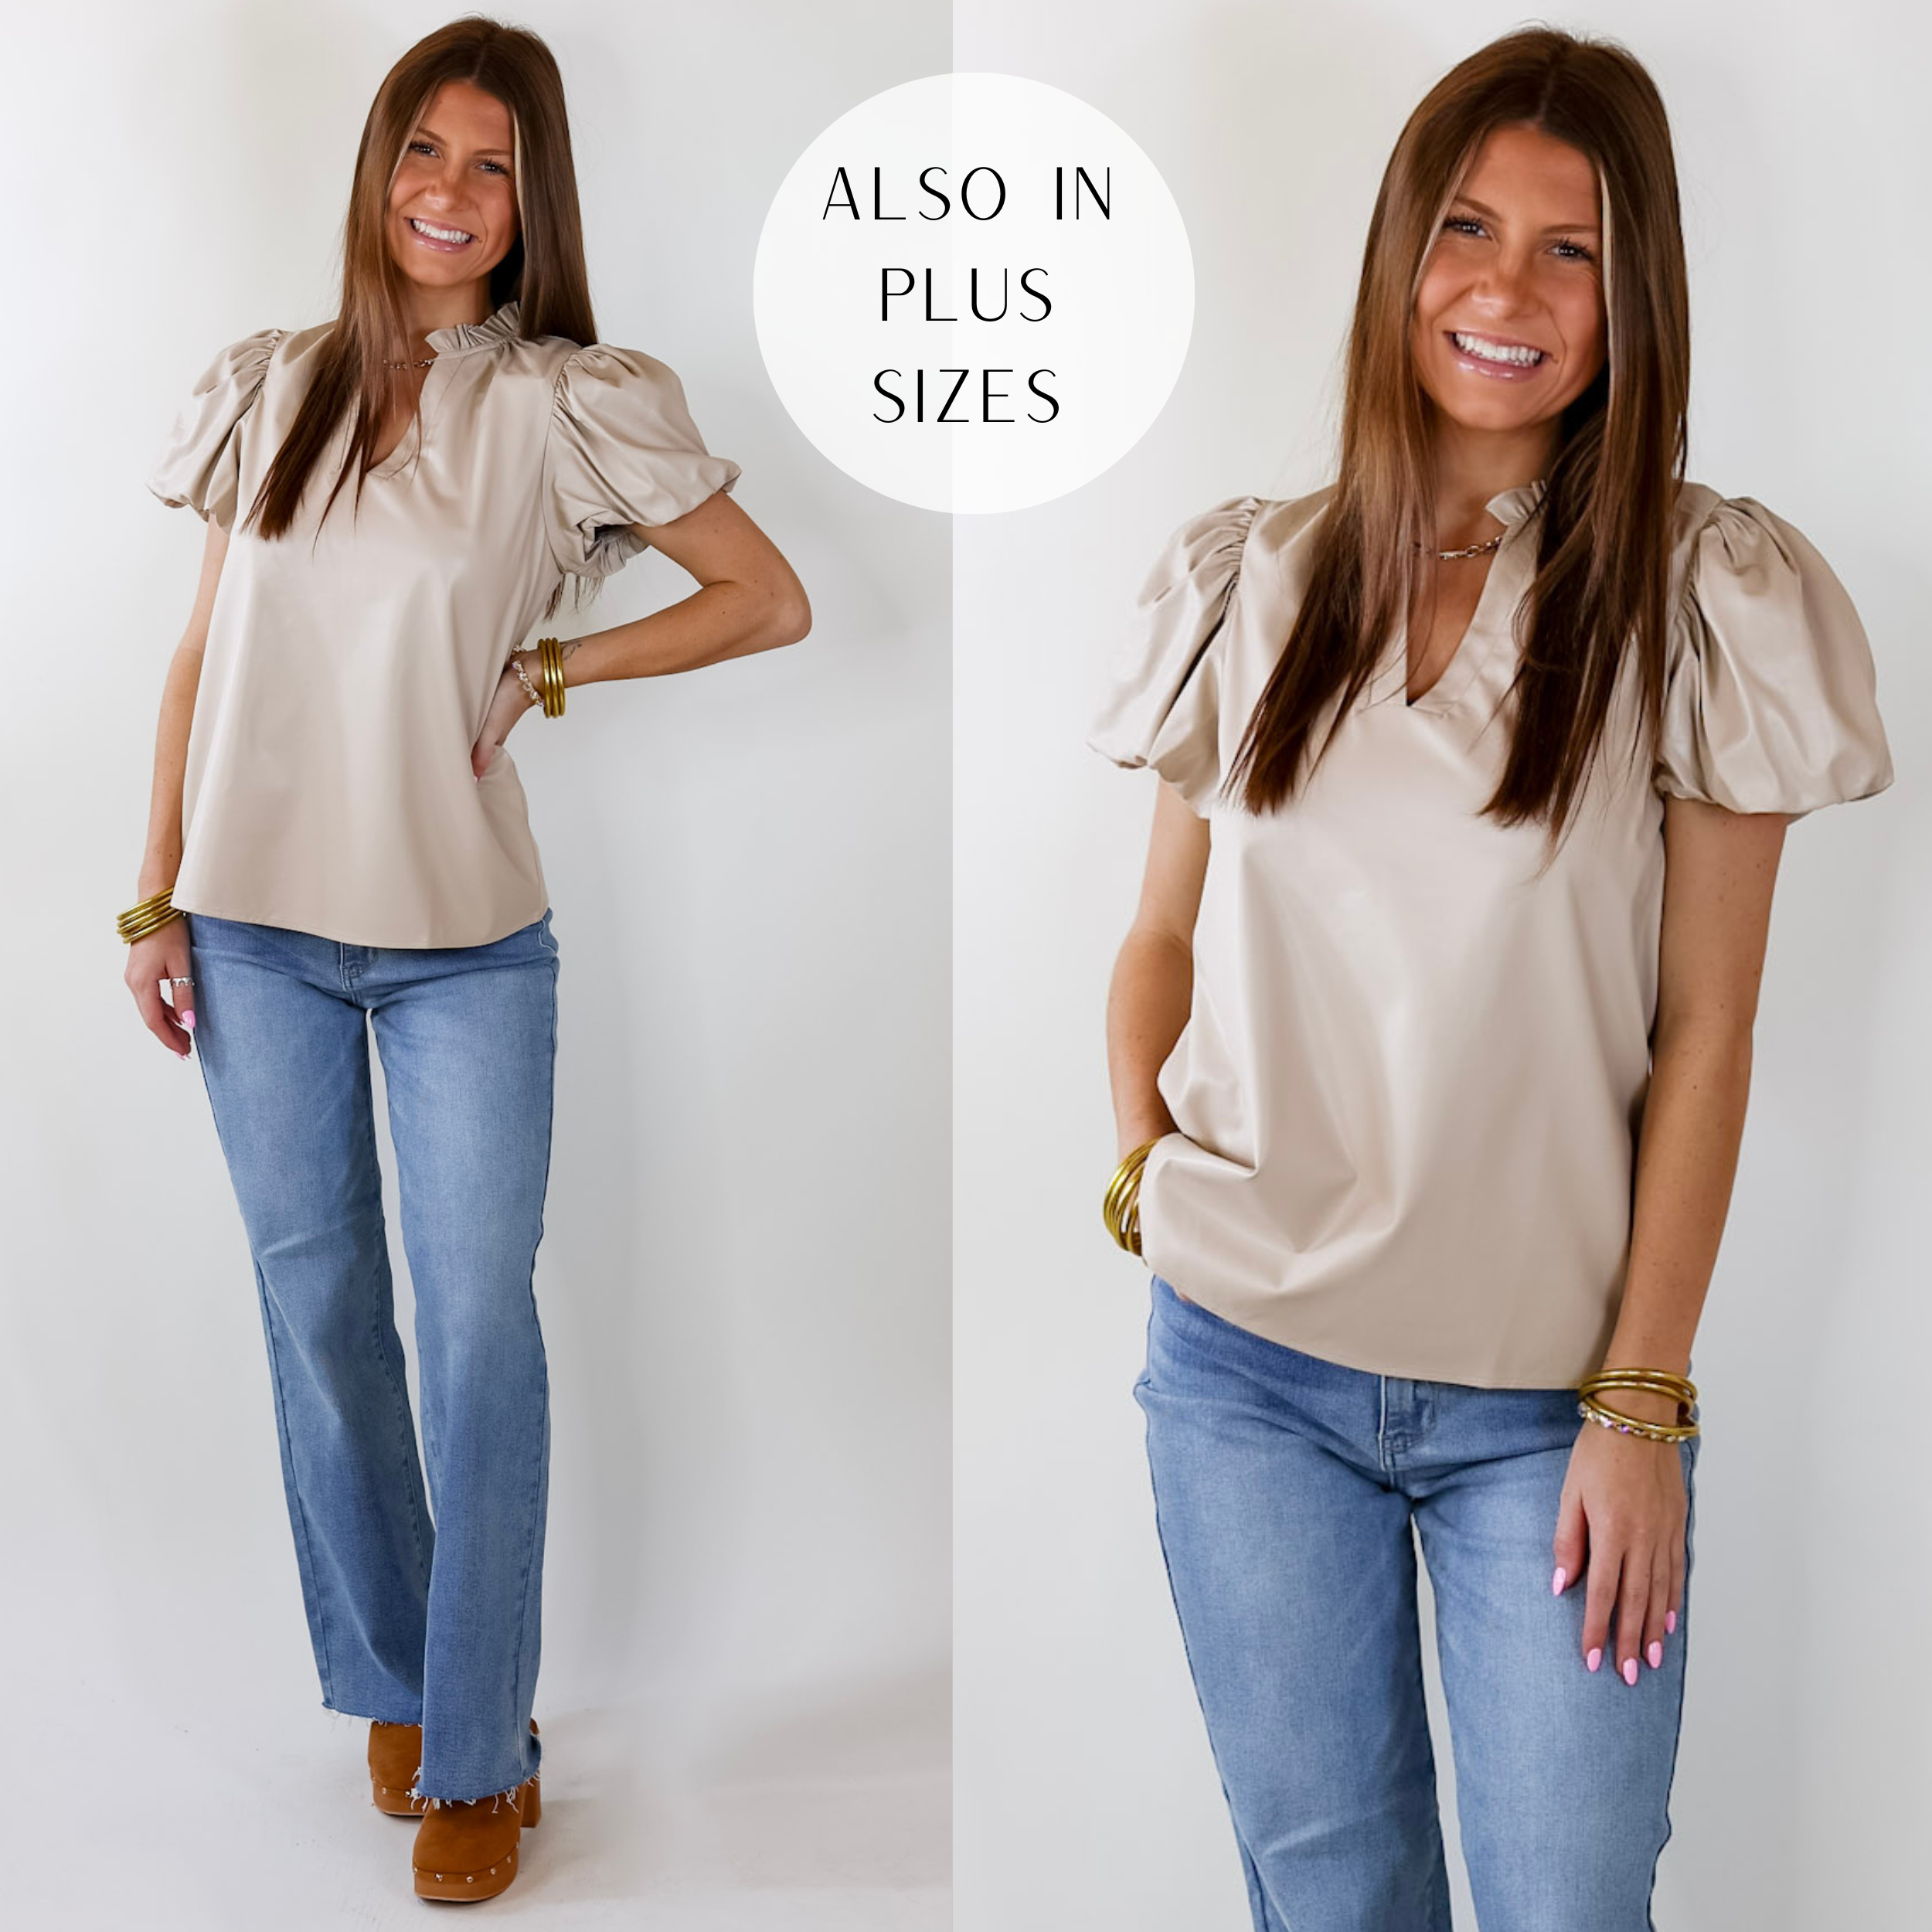 Replay The Night Faux Leather Top with Short Balloon Sleeves in Beige - Giddy Up Glamour Boutique